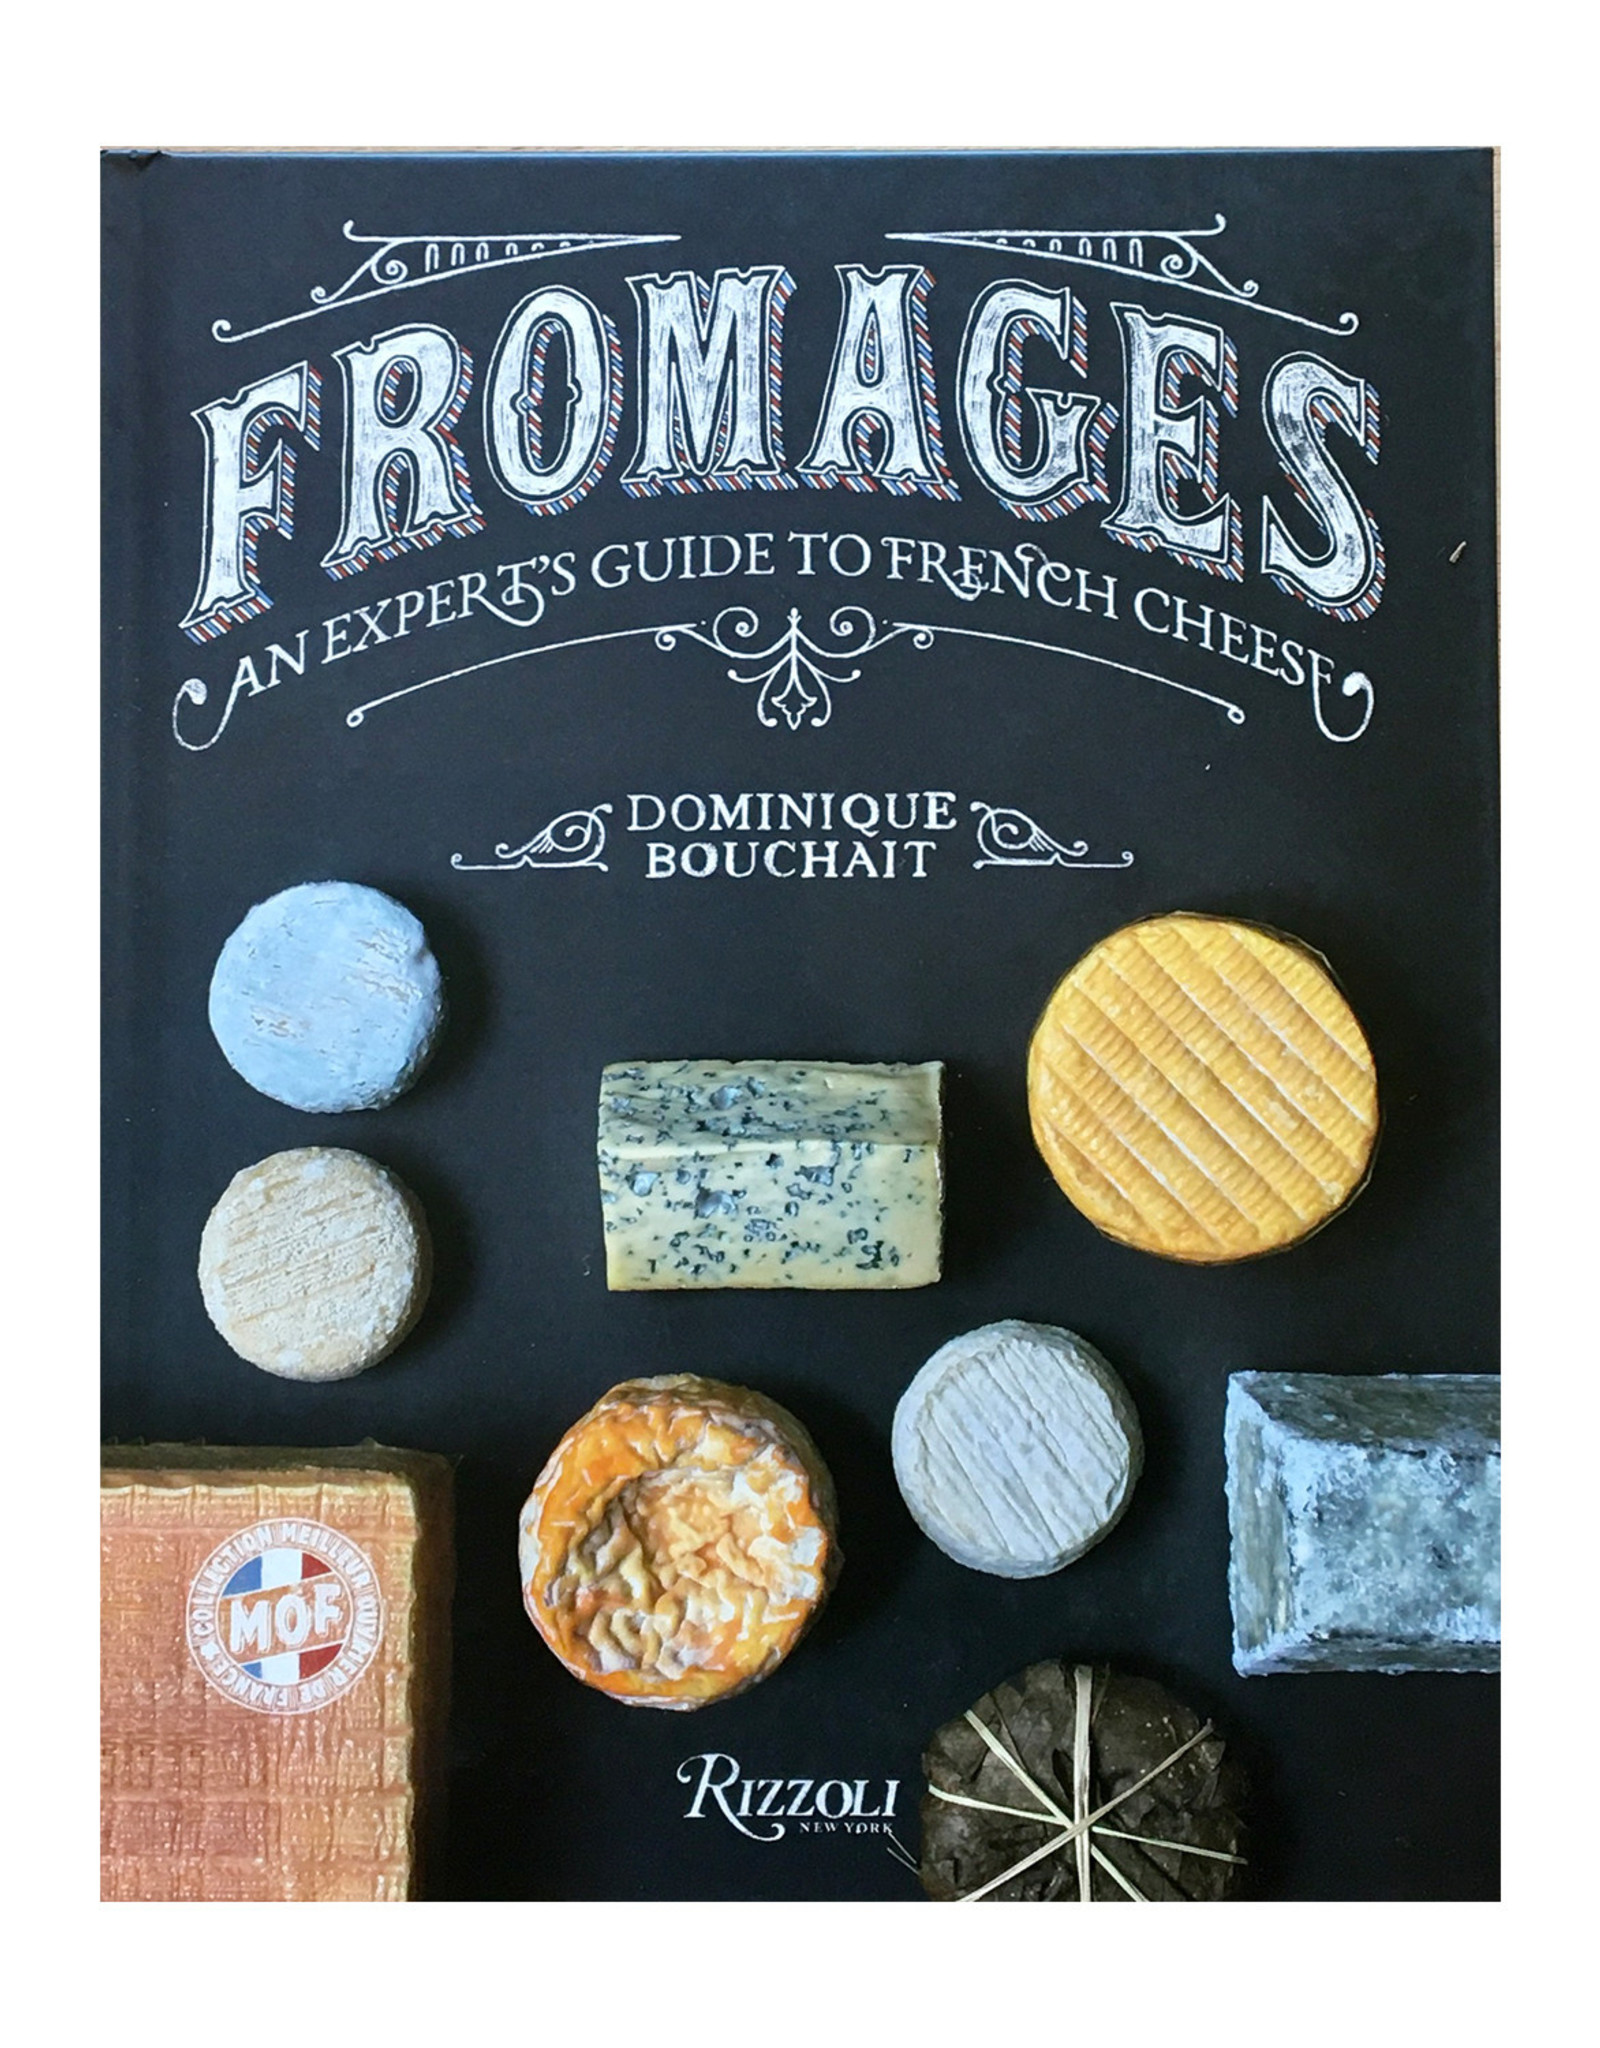 Fromages - By Dominique Bouchait!